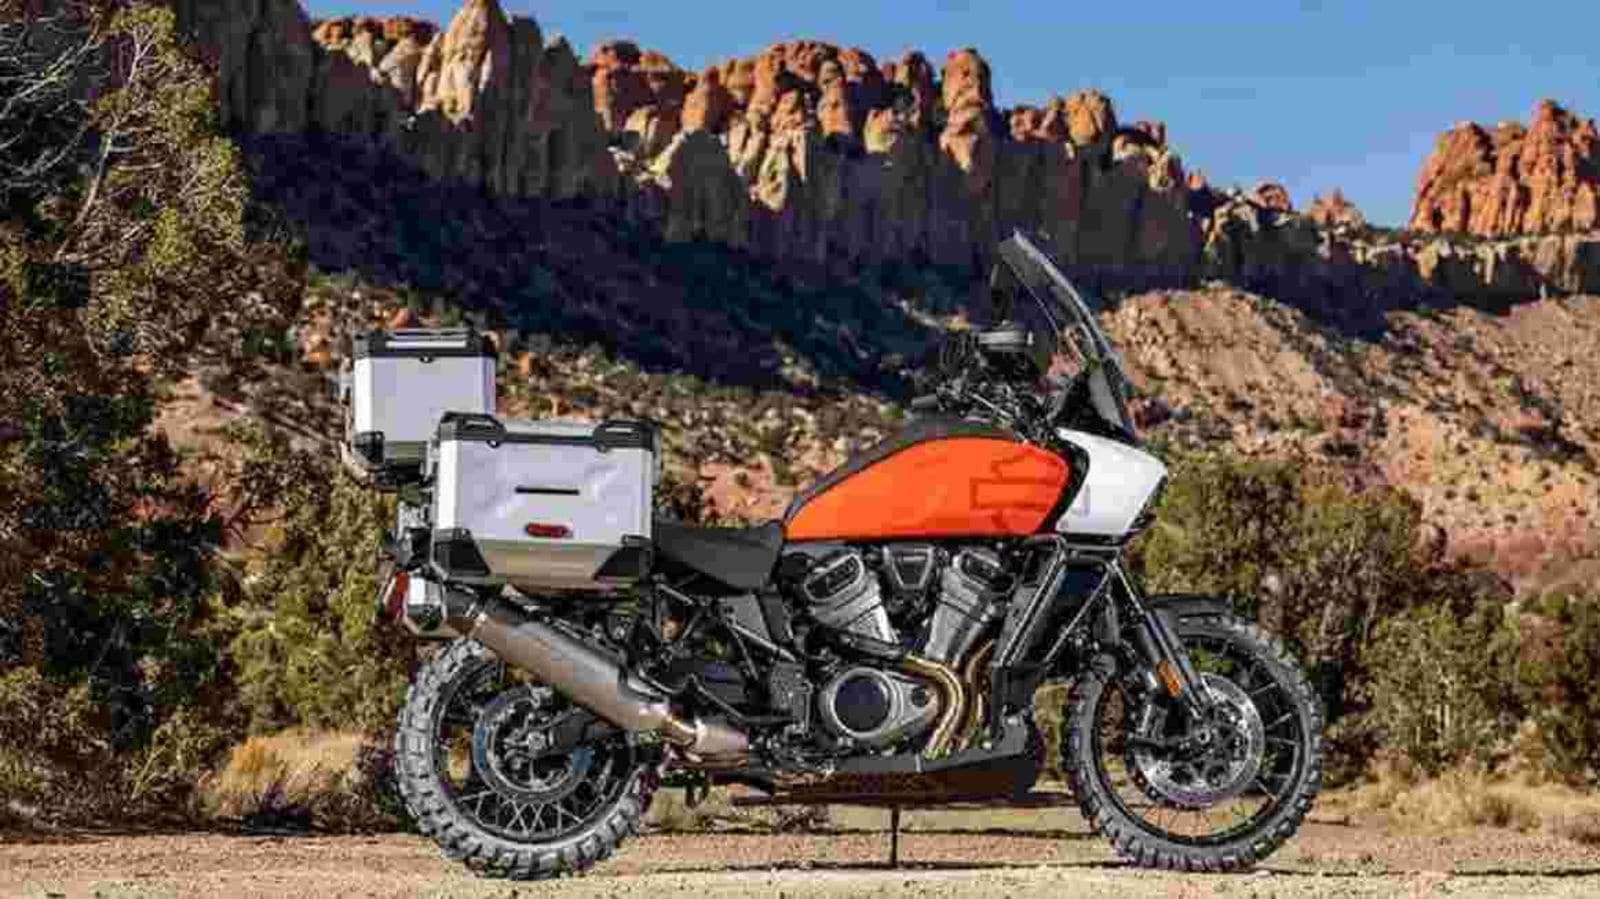 HarleyDavidson to set up dedicated electricmotorcycle division by